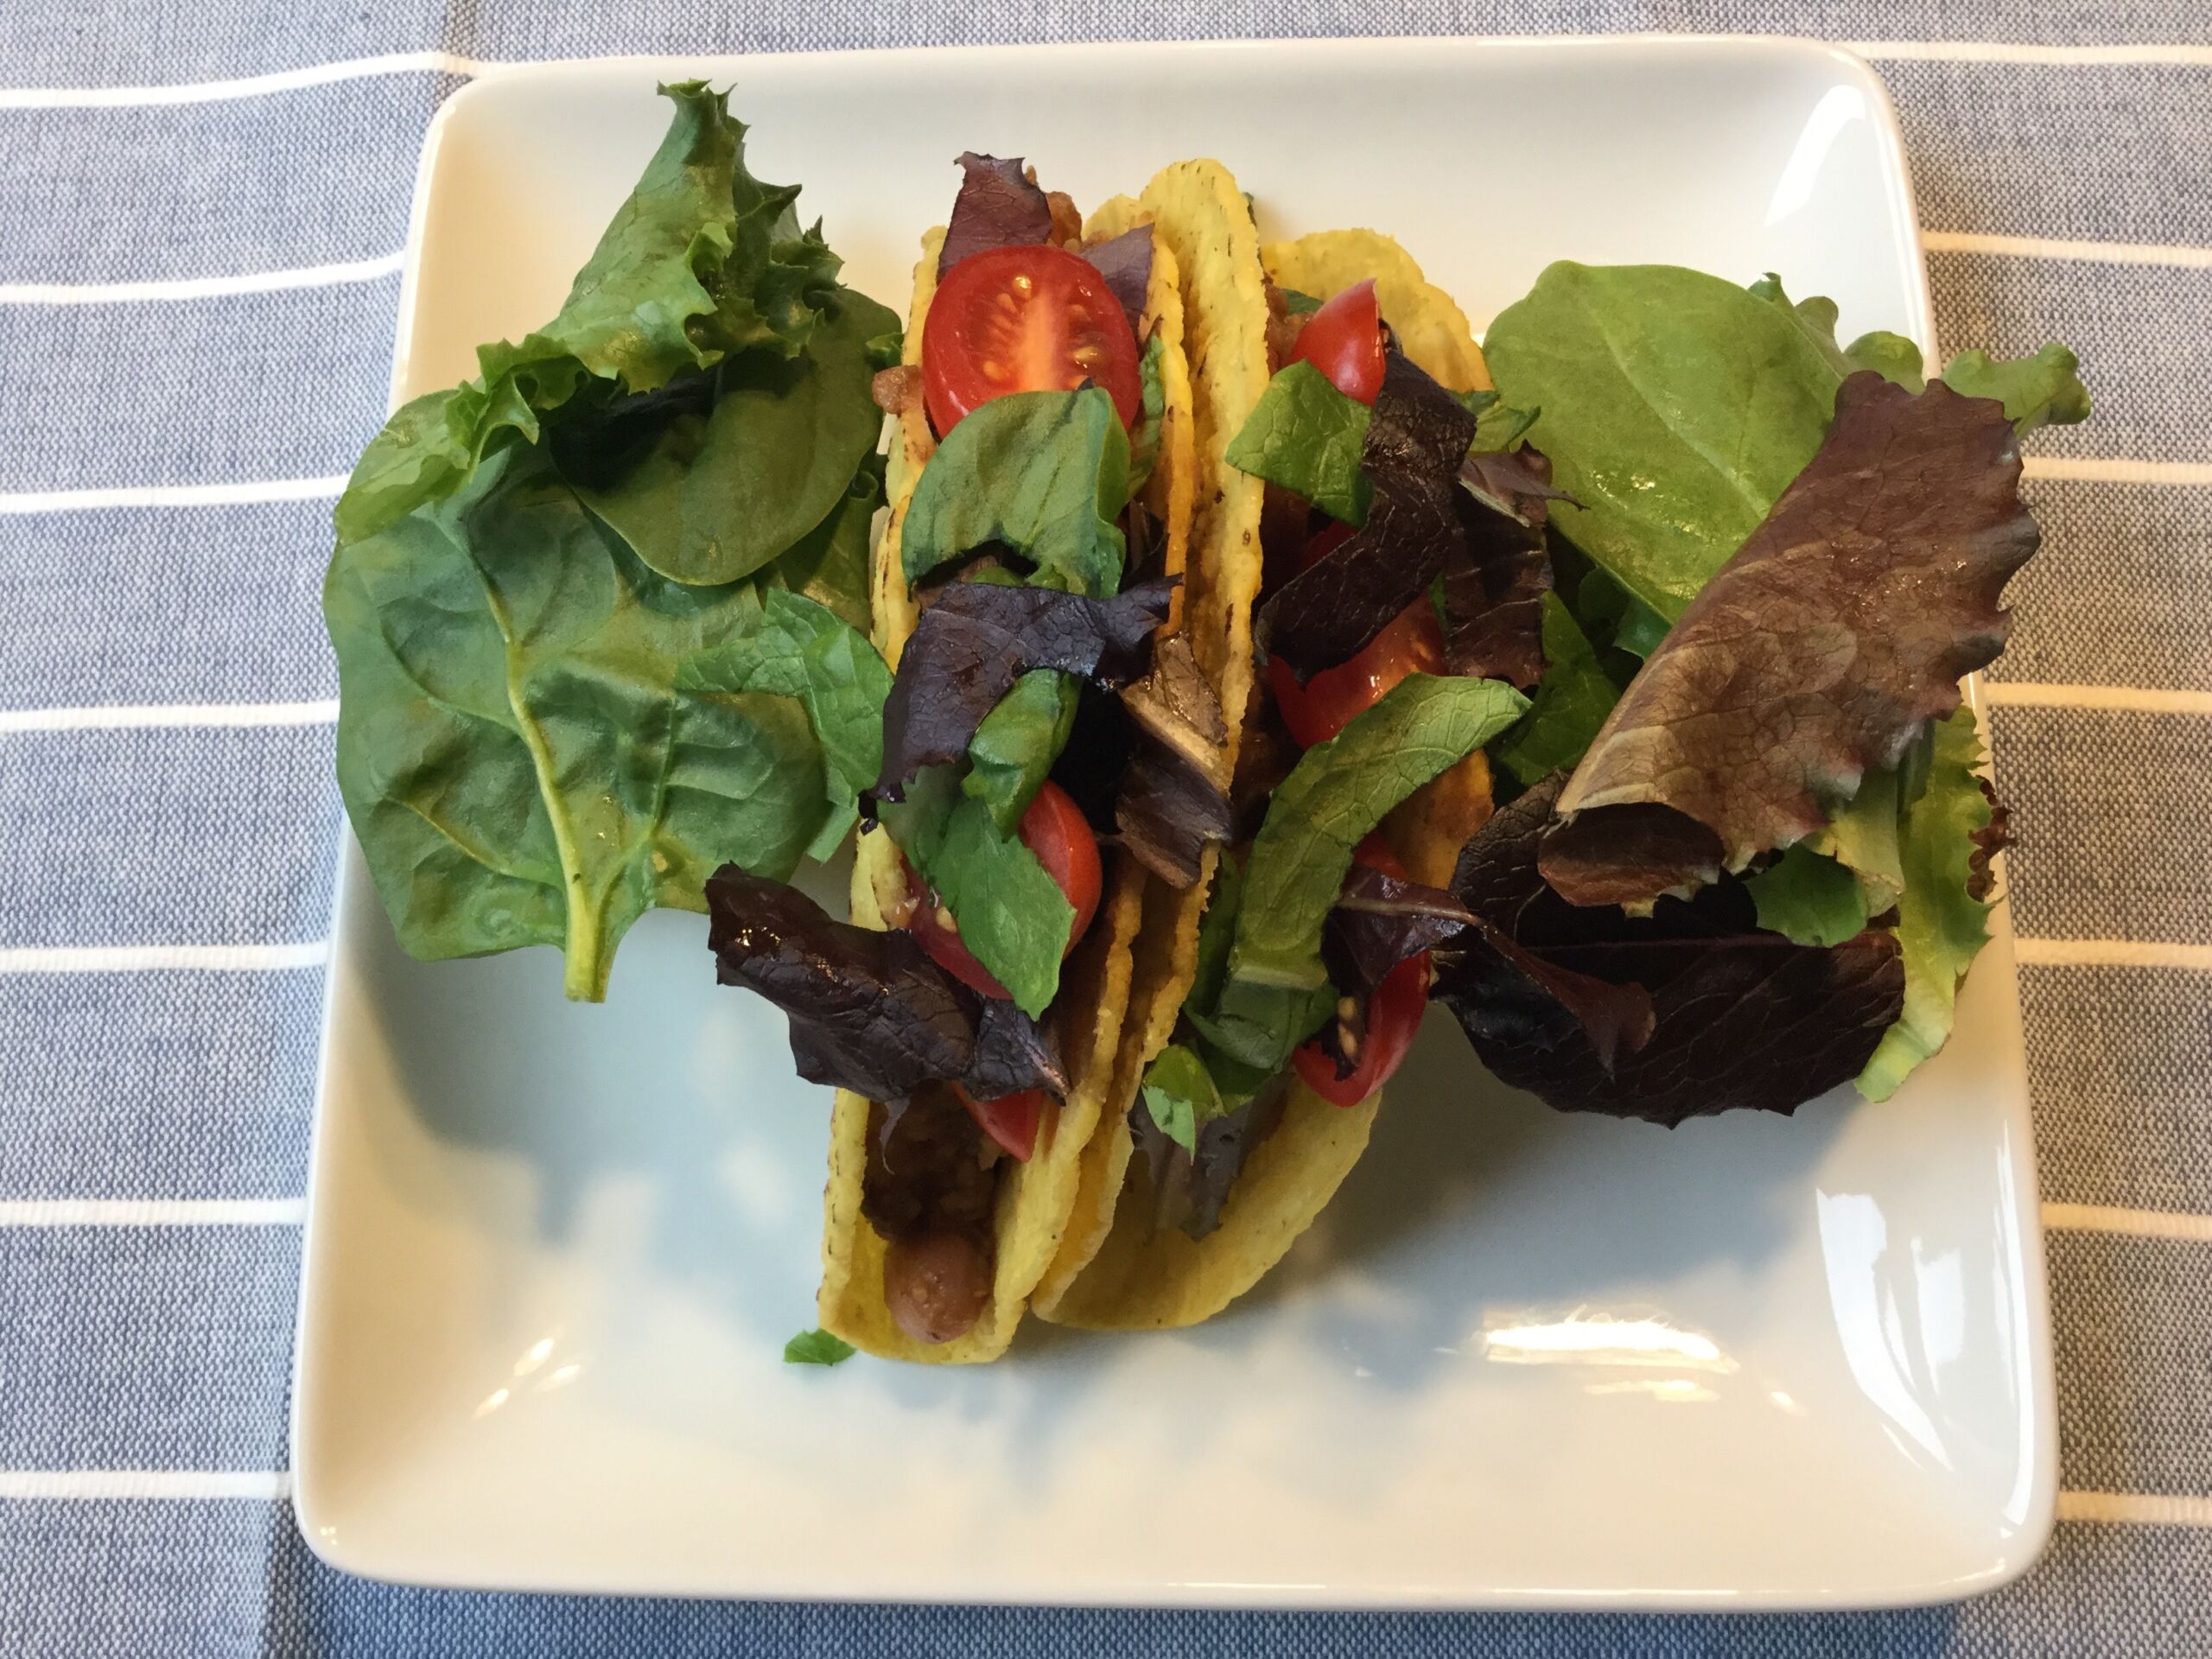 Street tacos featuring GroundPro Lentils